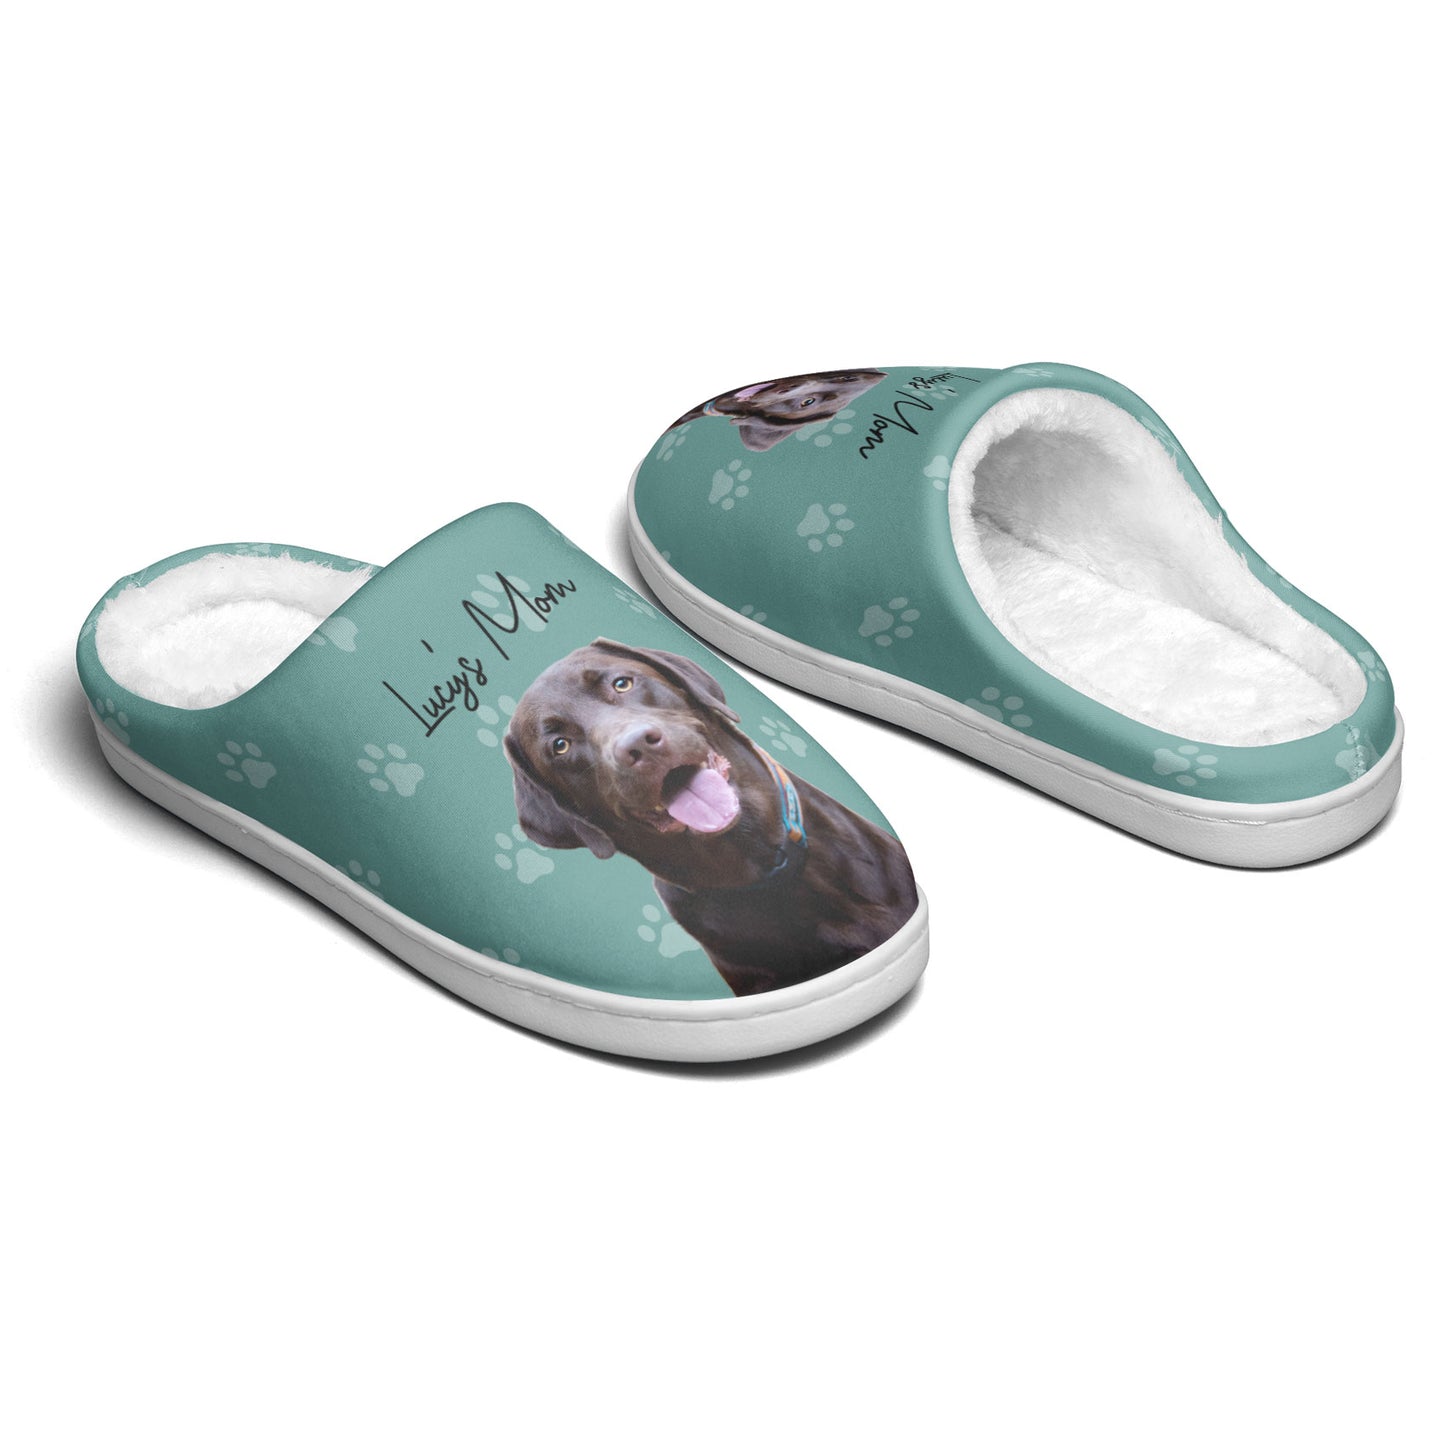 Custom Pet Photo Gift For Dog Lovers - Personalized Photo Slippers